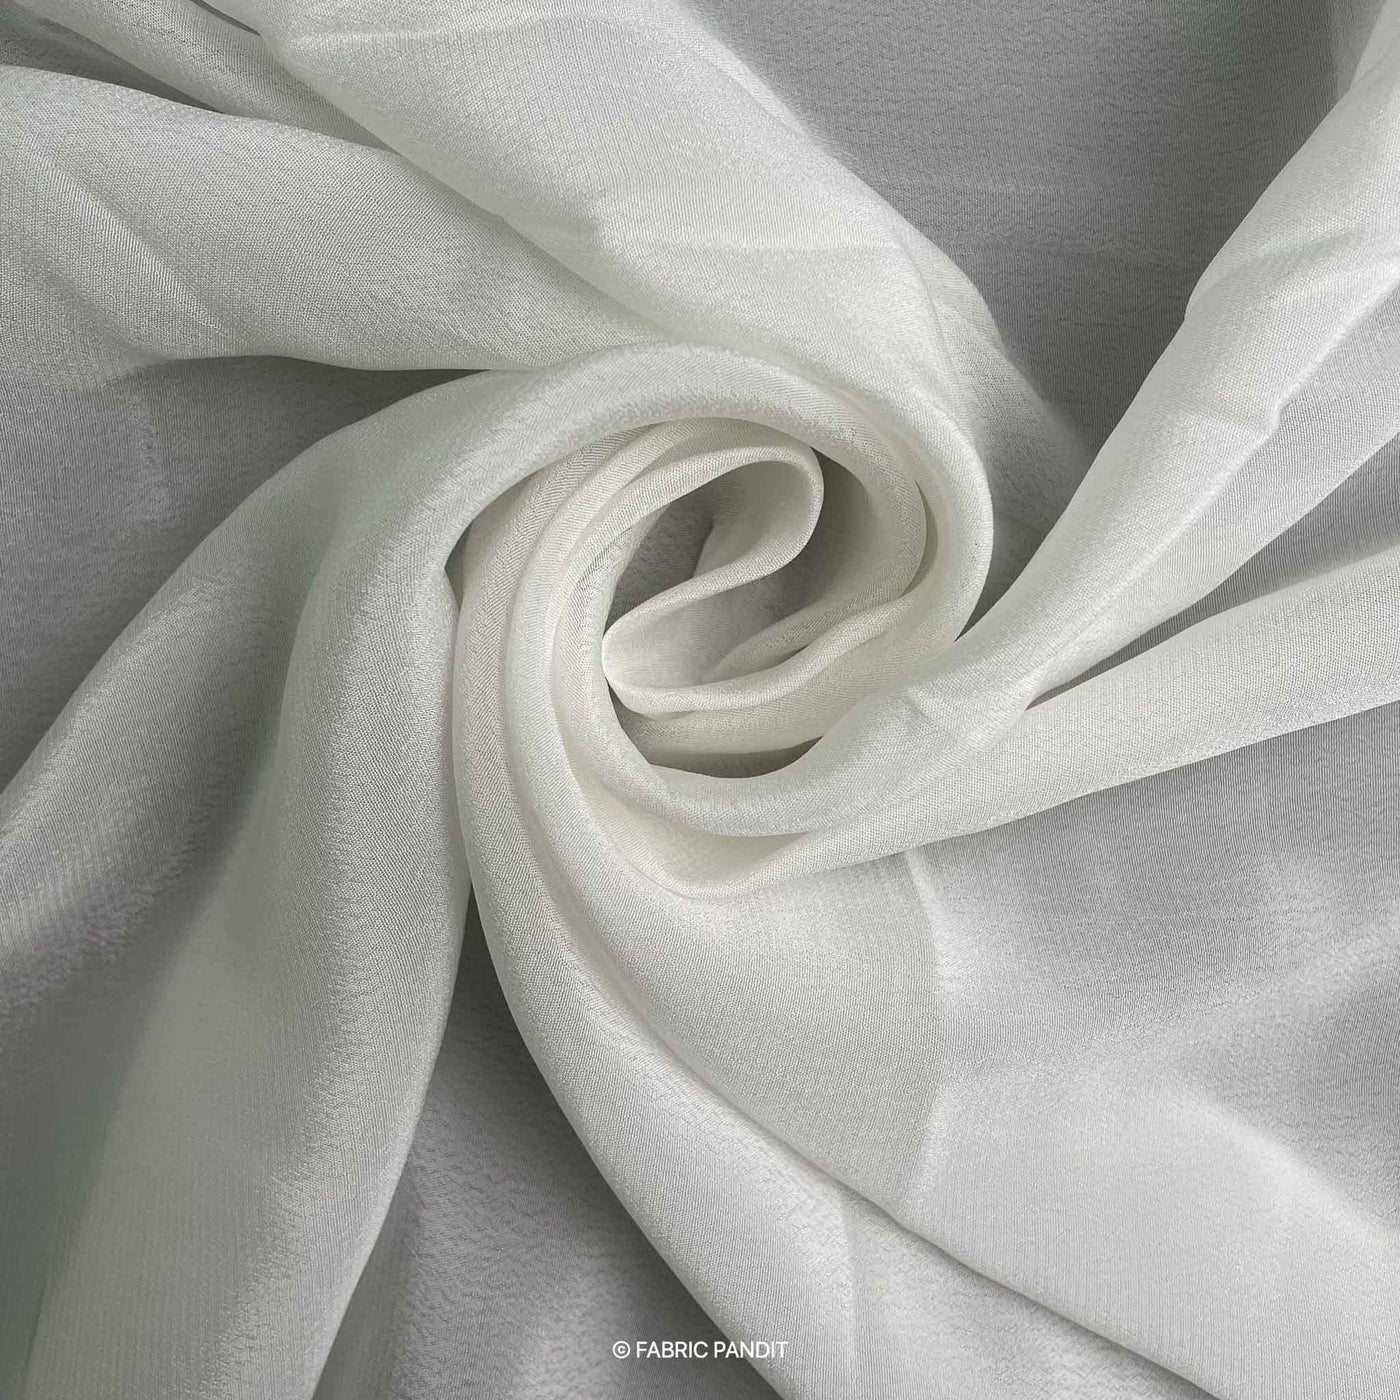 Fabric Pandit Fabric White Dyeable Viscose Natural Crepe Plain Fabric (Width 44 inches, 100 Gms)